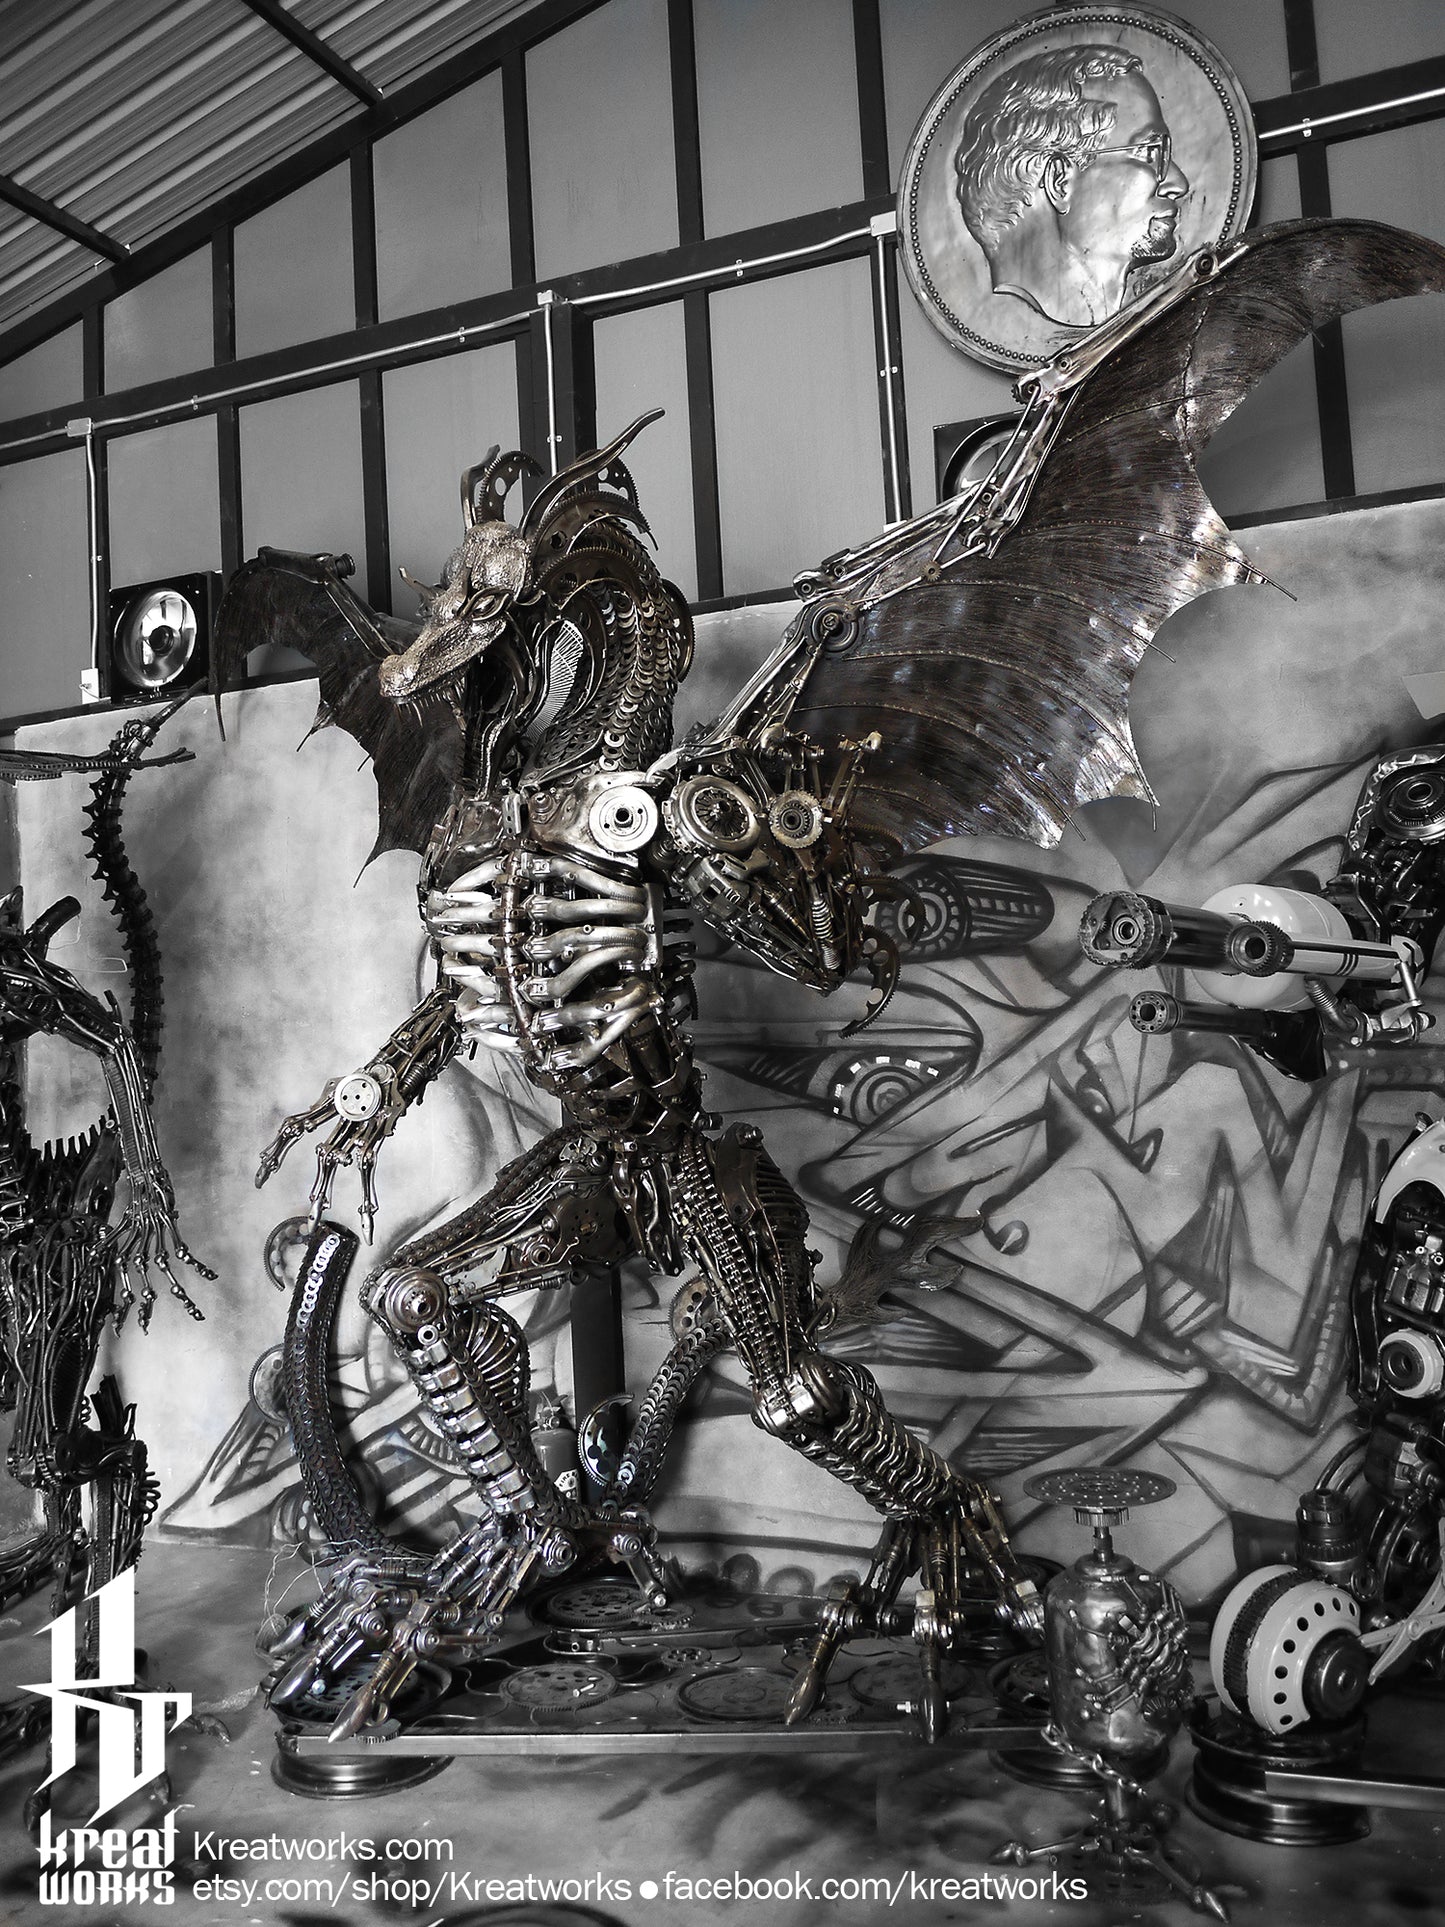 Recycled Metal Cruel Giant Dragon (3 m height) : Made to order / Recycle Metal Sustainable Sculpture Art